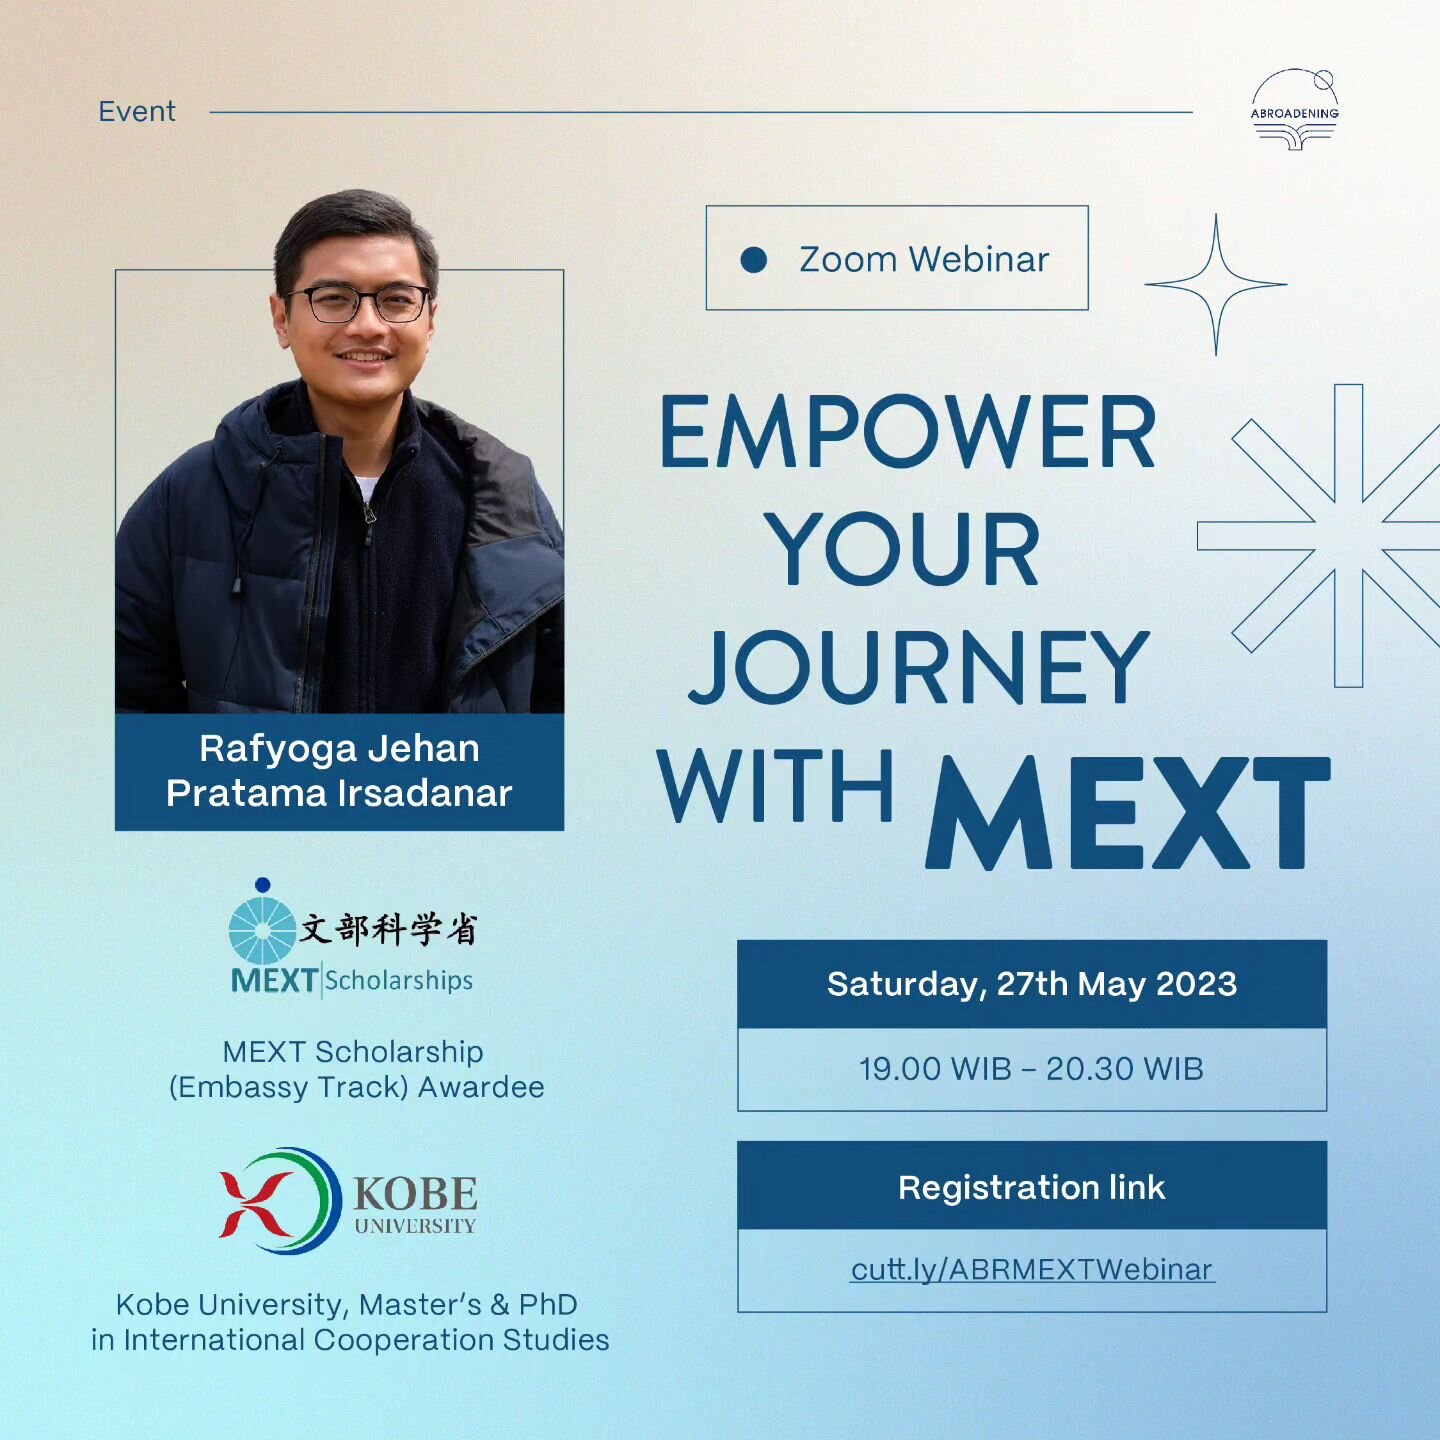 [WEBINAR: Empower Your Journey with MEXT 🇯🇵]

Interested in pursuing your study in Japan? We have something exciting for you 🤩

We are running a 1,5 hour webinar with @rafyogacom , MEXT scholarship awardee to Kobe University 🎉🎉

✨ What will you 